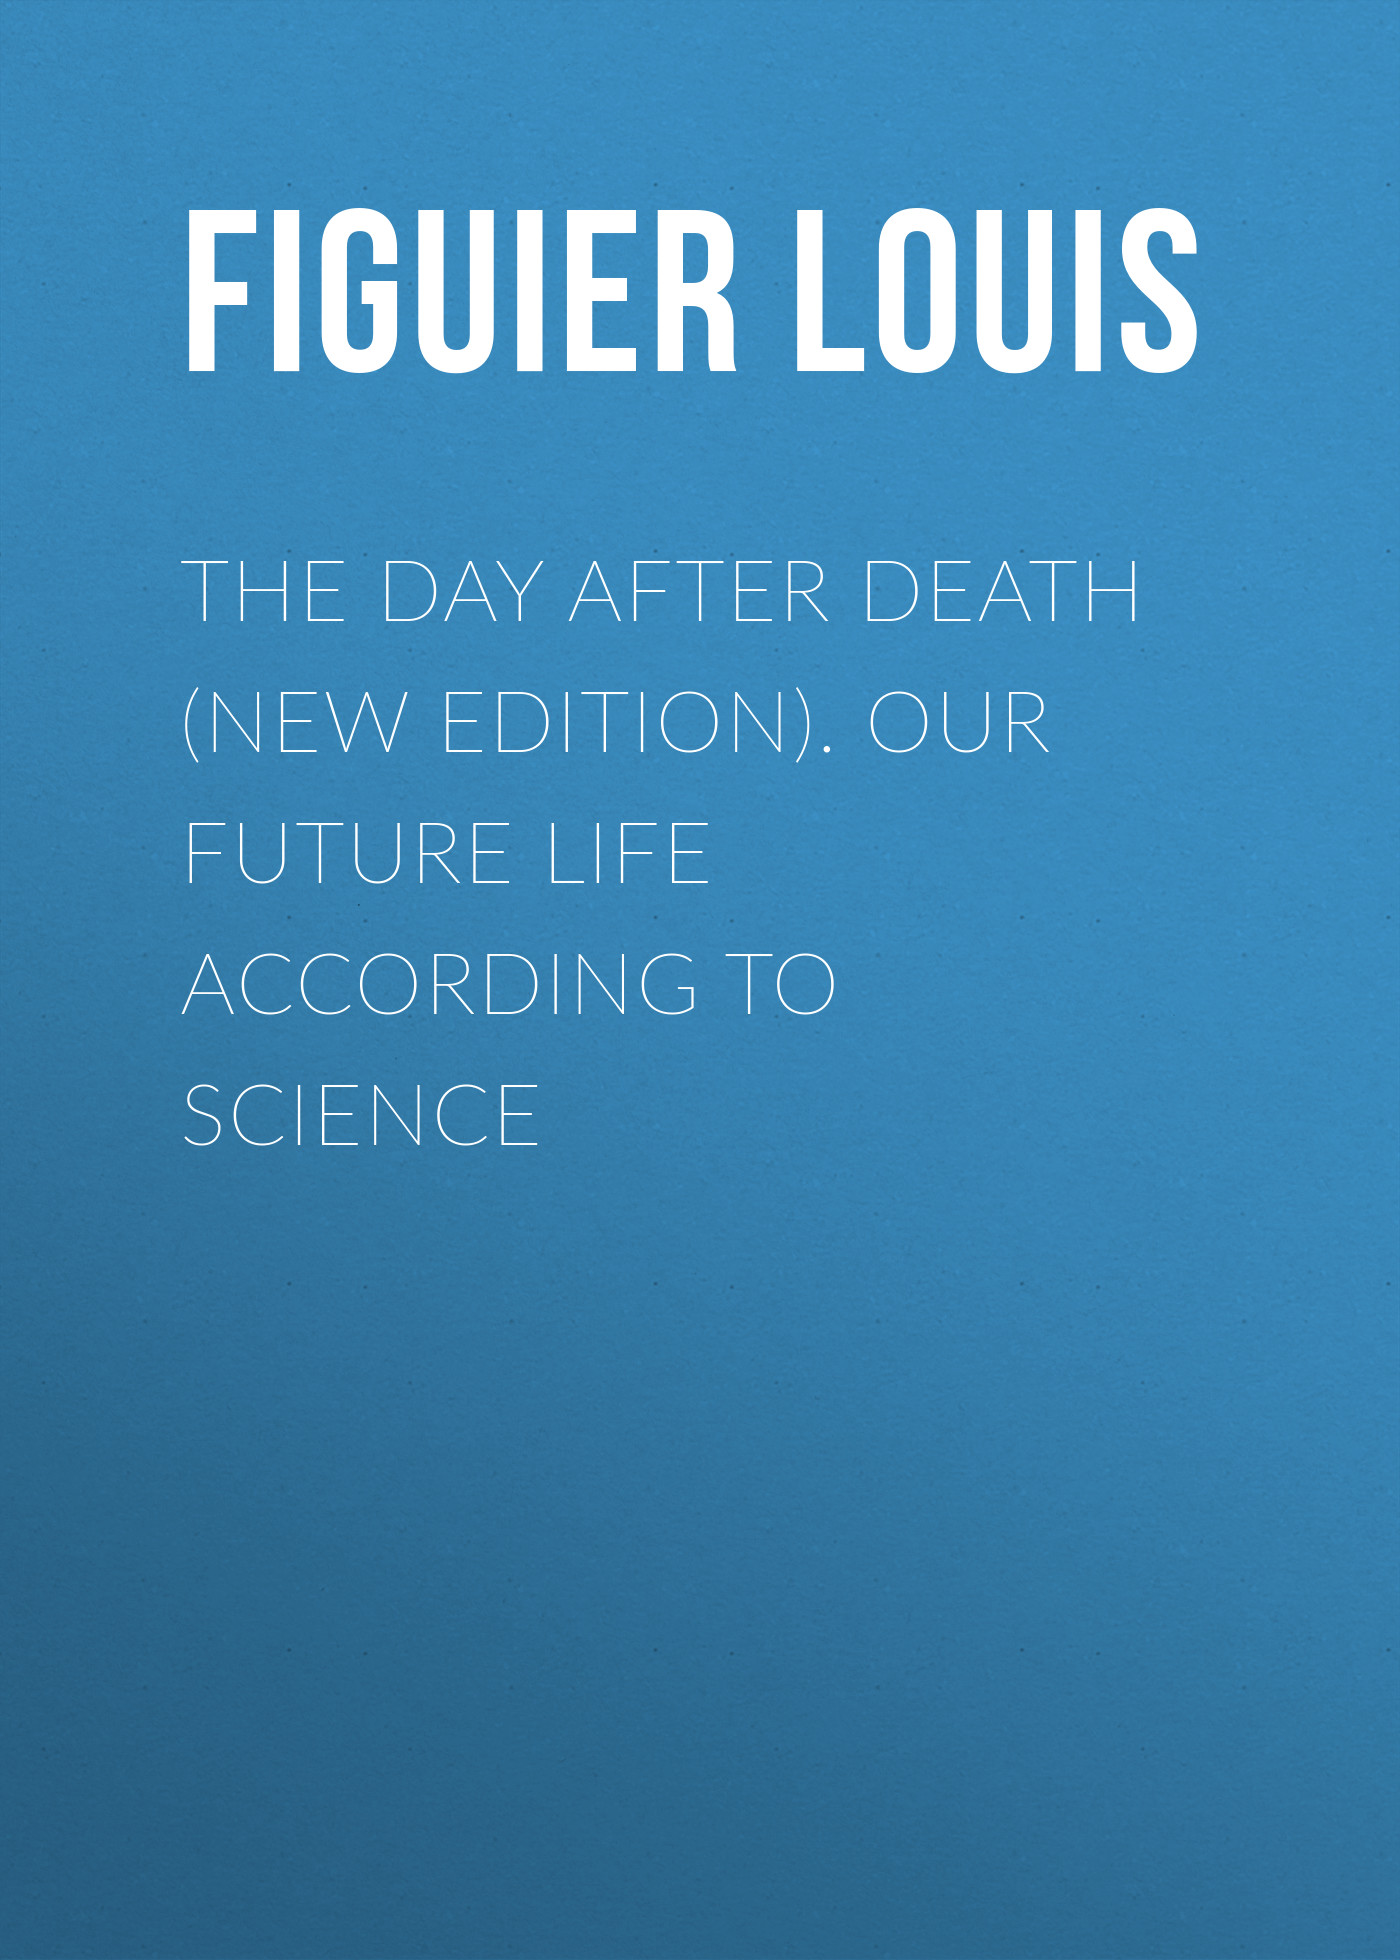 The Day After Death (New Edition). Our Future Life According to Science